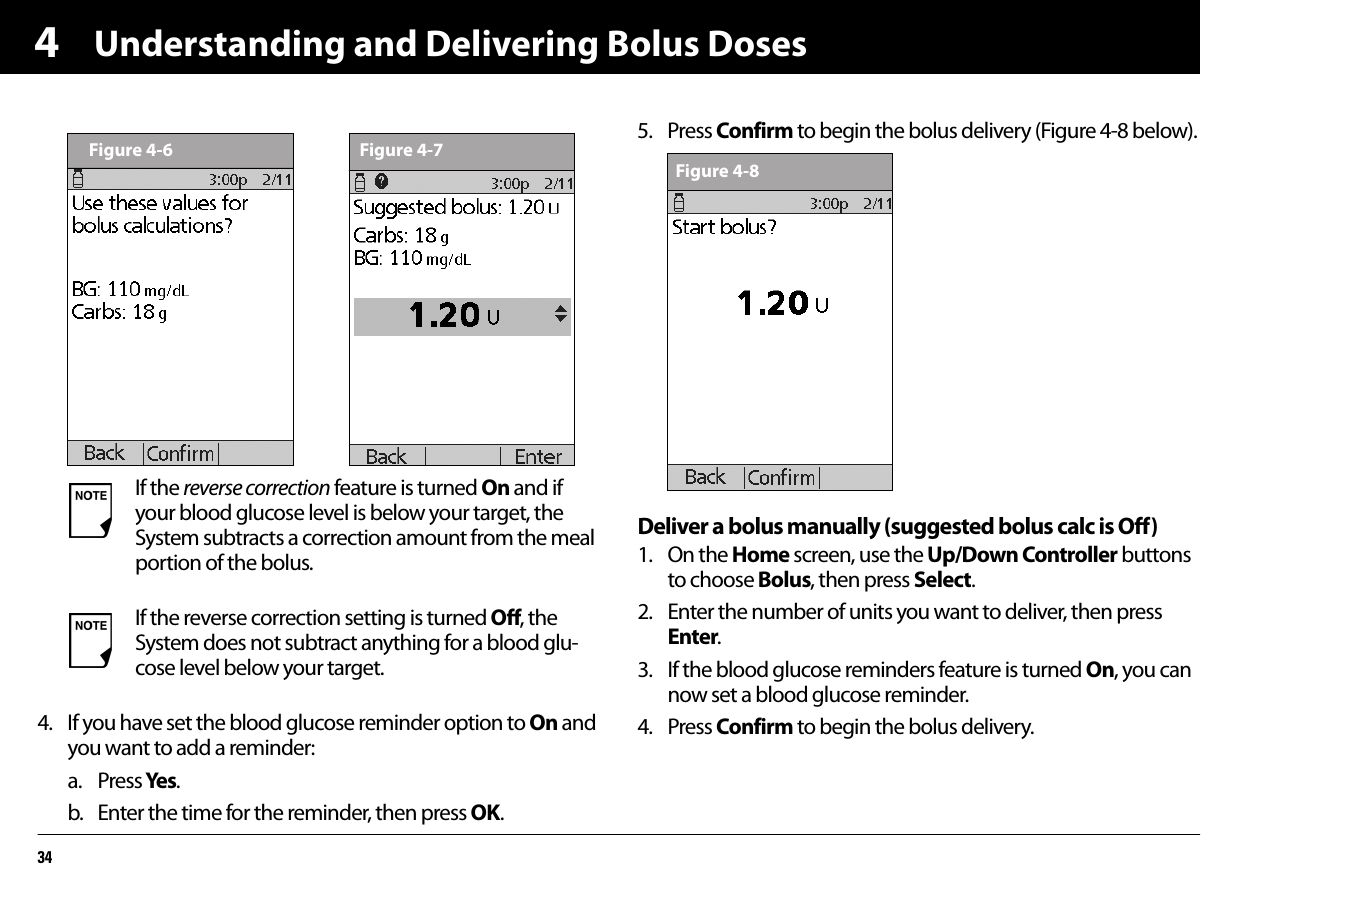 Understanding and Delivering Bolus Doses3444. If you have set the blood glucose reminder option to On and you want to add a reminder:a. Press Yes .b. Enter the time for the reminder, then press OK.5. Press Confirm to begin the bolus delivery (Figure 4-8 below).Deliver a bolus manually (suggested bolus calc is Off)1. On the Home screen, use the Up/Down Controller buttons to choose Bolus, then press Select.2. Enter the number of units you want to deliver, then press Enter.3. If the blood glucose reminders feature is turned On, you can now set a blood glucose reminder. 4. Press Confirm to begin the bolus delivery.If the reverse correction feature is turned On and if your blood glucose level is below your target, the System subtracts a correction amount from the meal portion of the bolus.If the reverse correction setting is turned Off, the System does not subtract anything for a blood glu-cose level below your target.Figure 4-6 Figure 4-7Figure 4-8